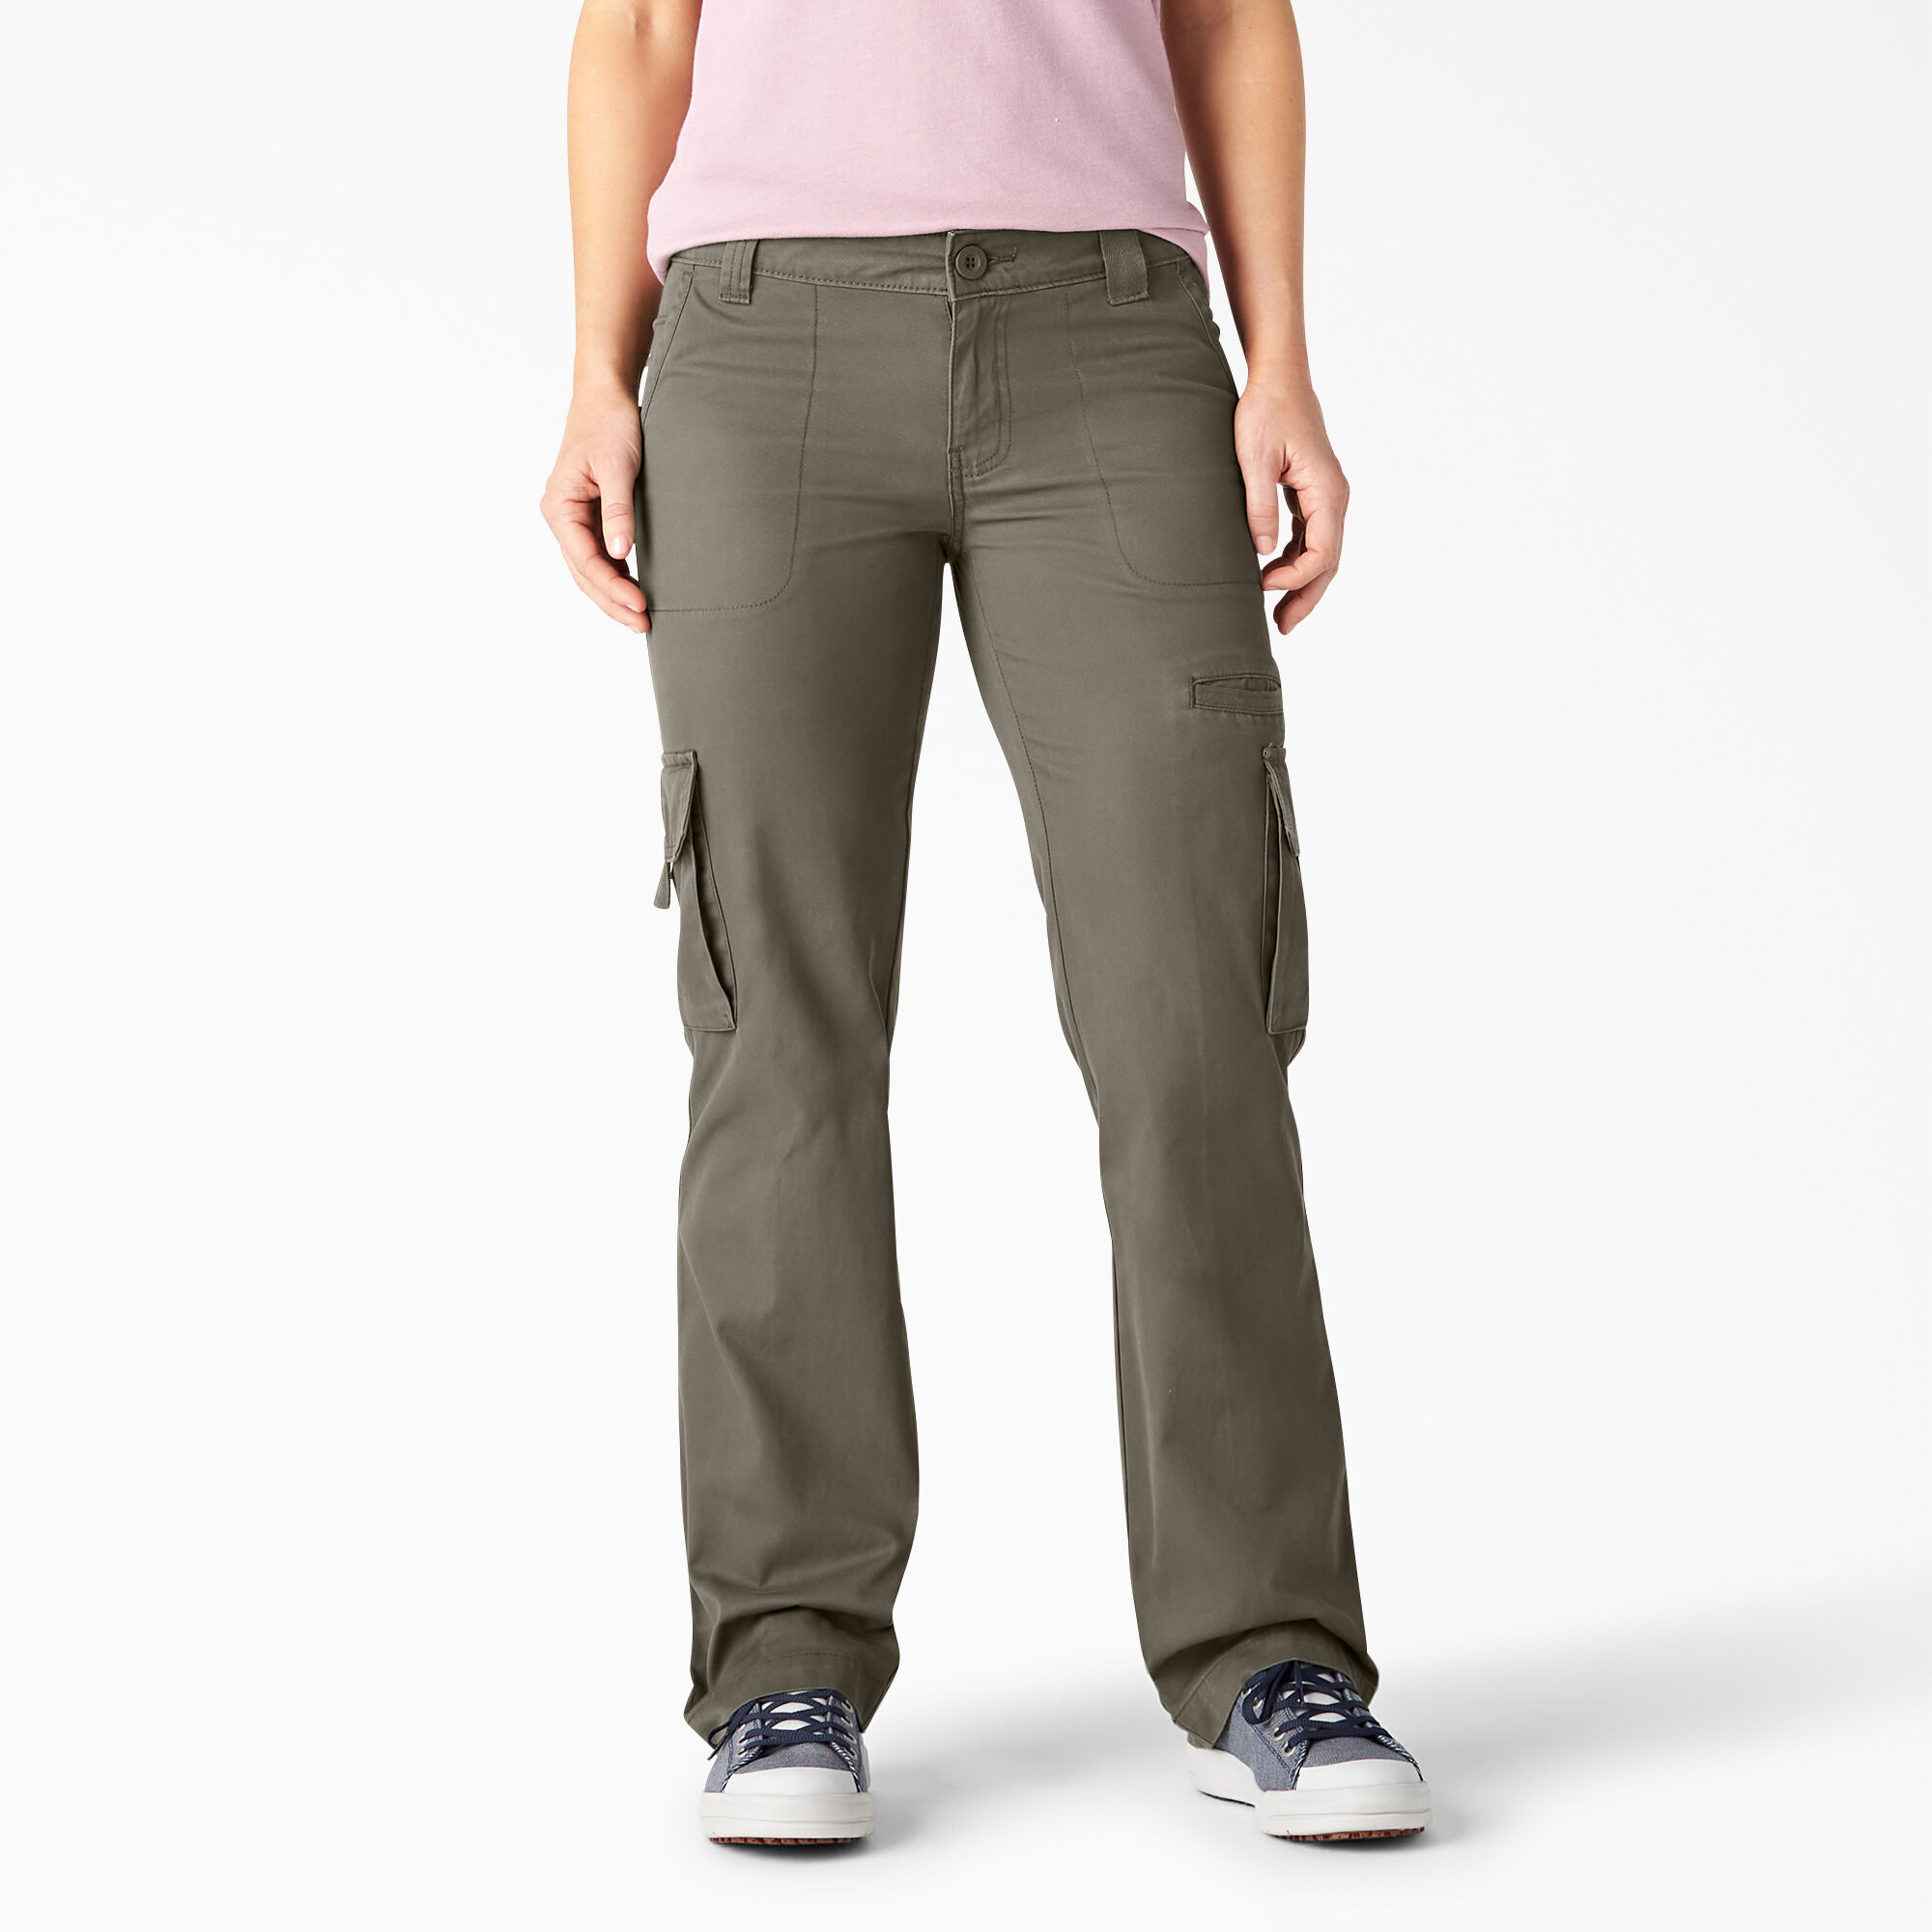 Women's Relaxed Cargo Pants - Leaf Green (RGE)